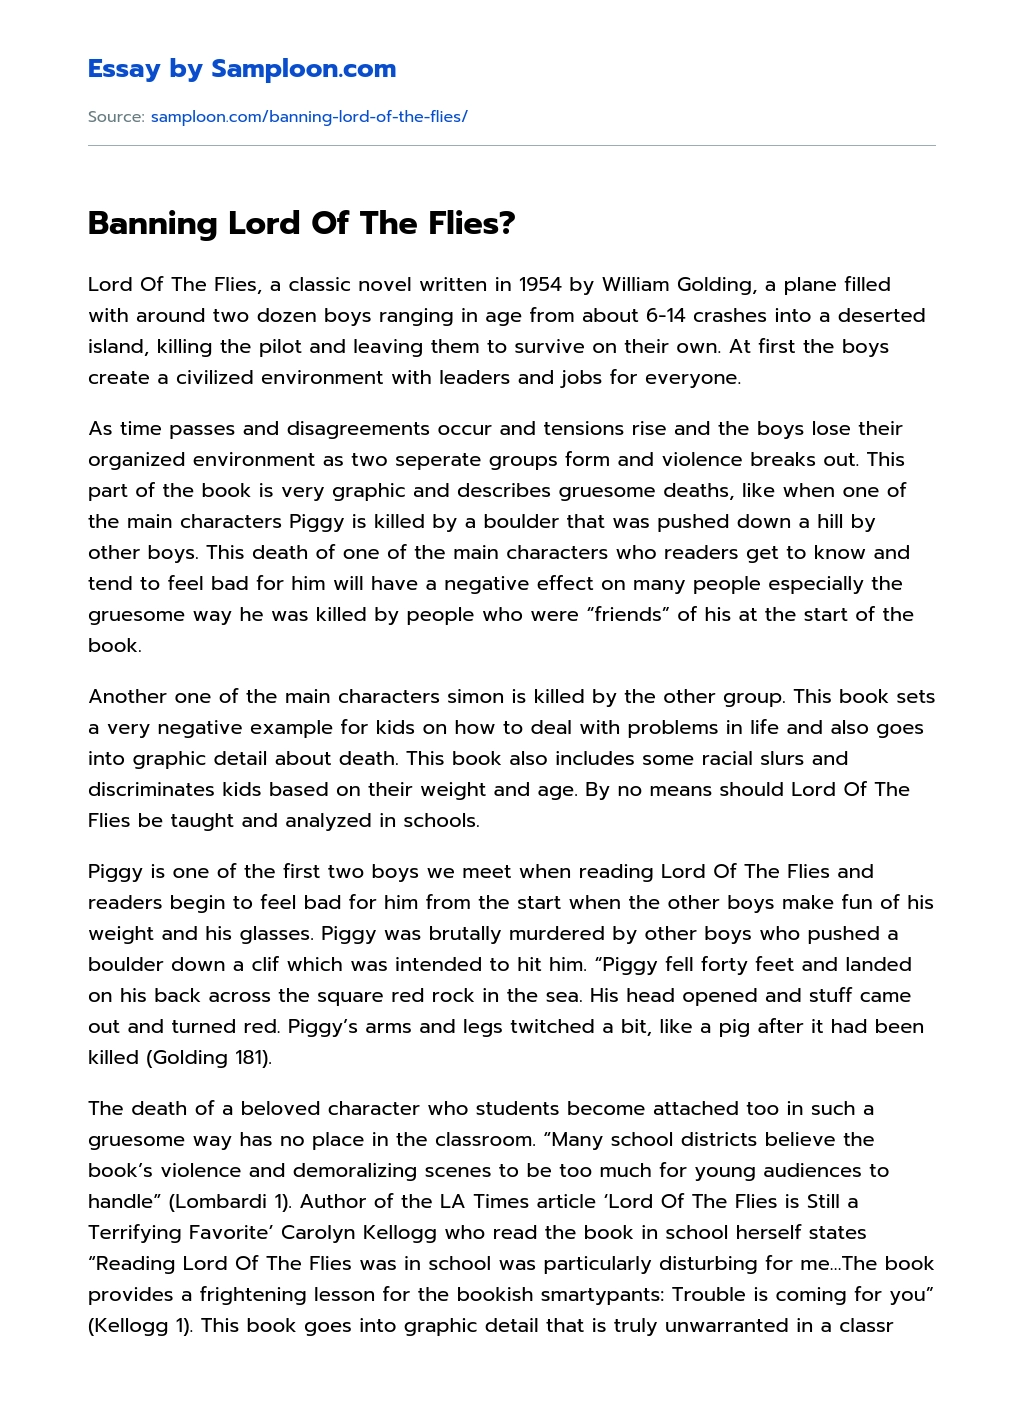 Banning Lord Of The Flies? Book Review essay